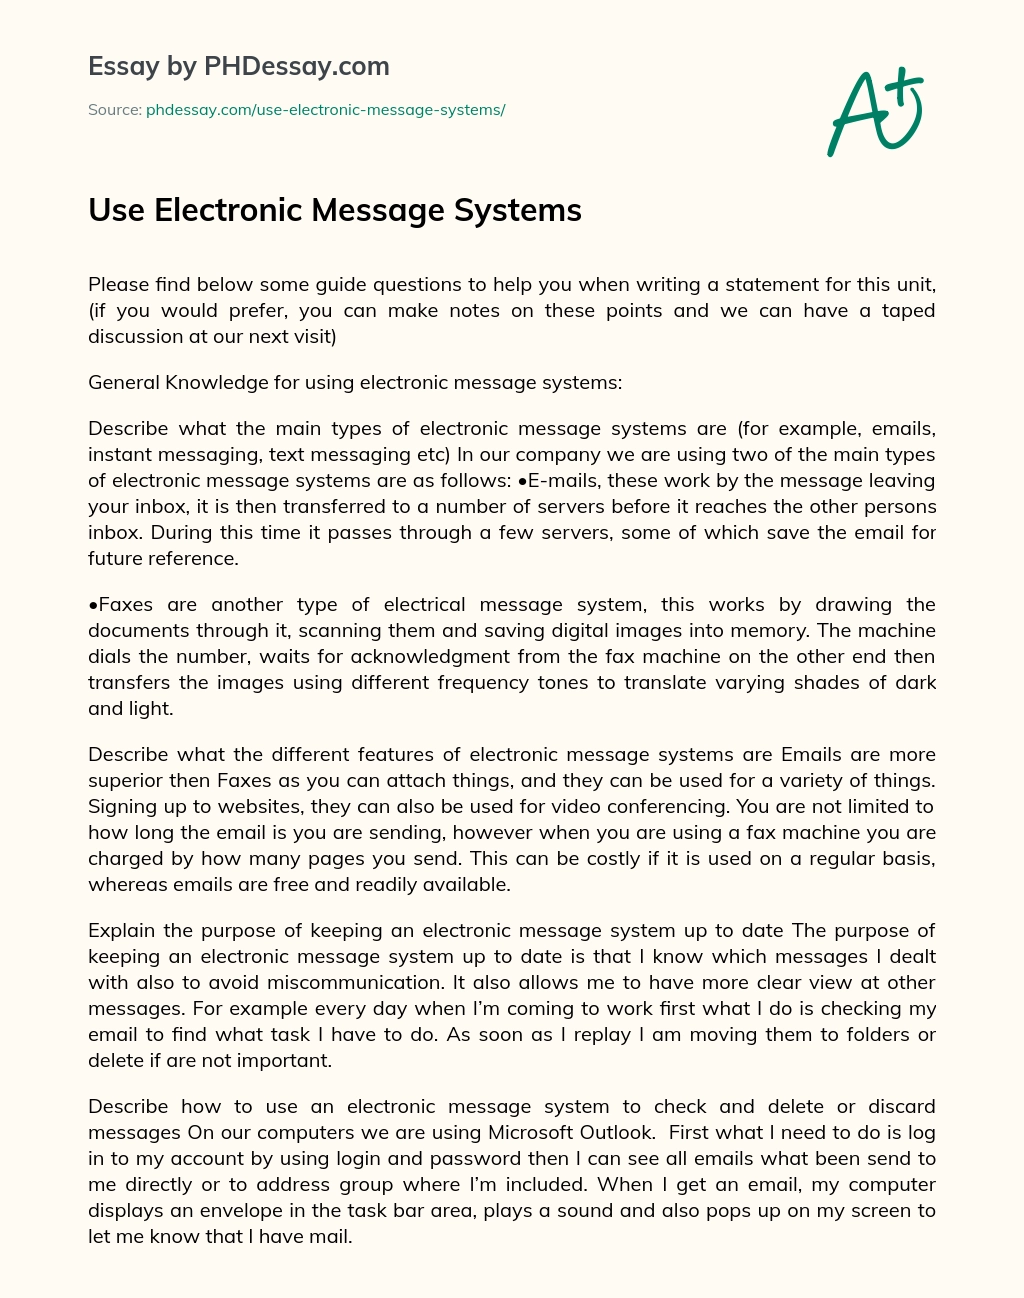 Use Electronic Message Systems essay